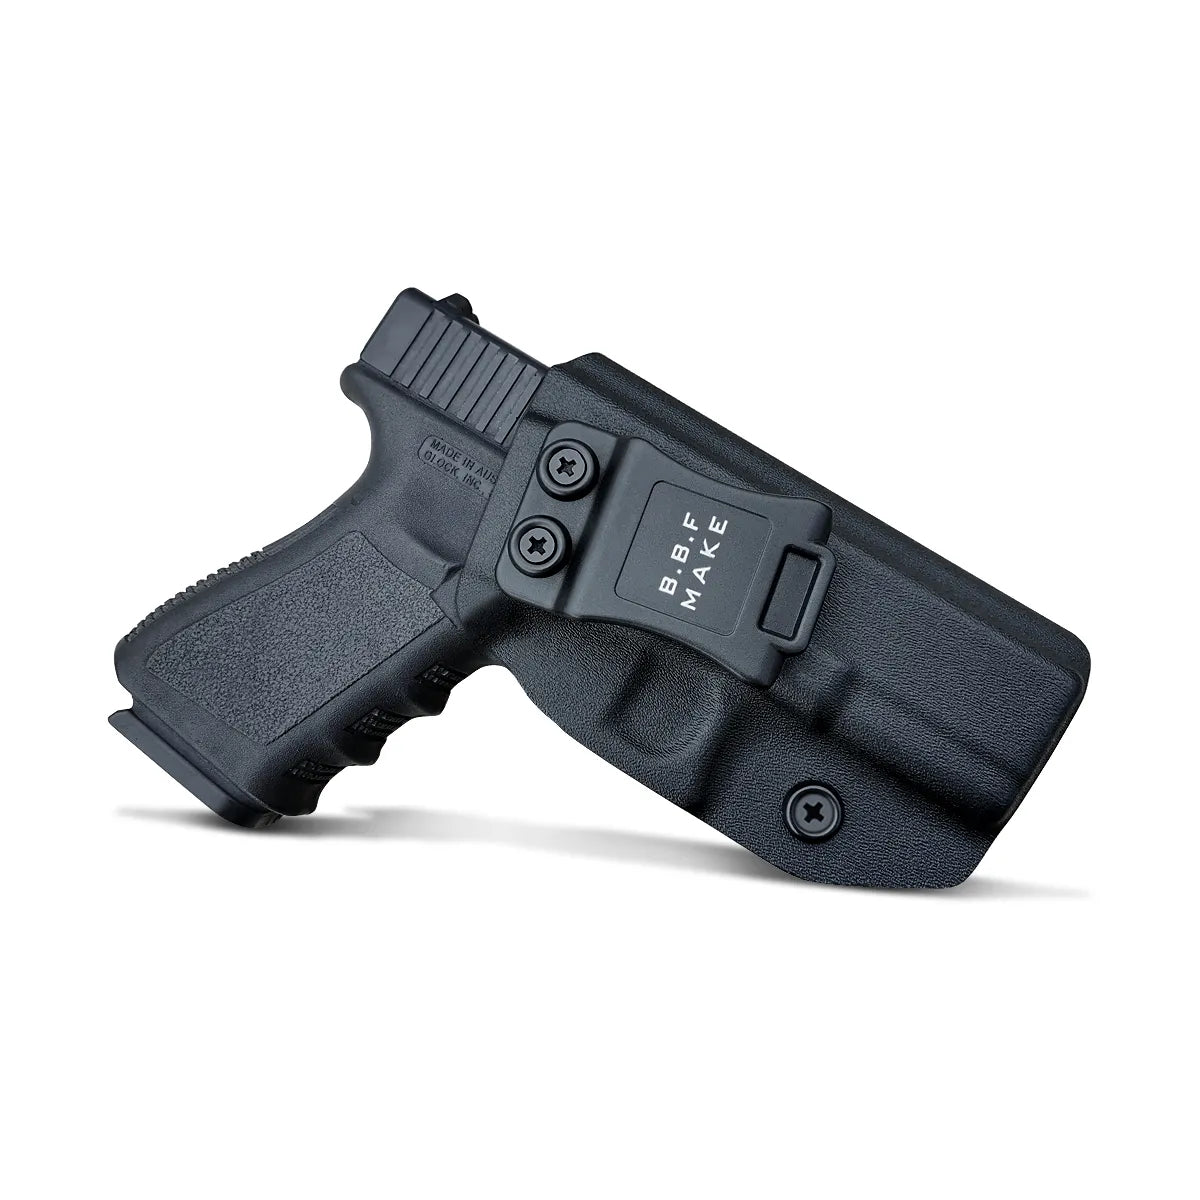 Glock 19-45 IWB Kydex Covert Concealed Holster IWB / OWB Kydex Holster for Glock 19-45 IWB Kydex Covert Concealed Pistol Accessories- Inside / Outside Waistband Concealed Carry - Adj. Width Height Retention Cant, Cover Mag-Button, Entrance Widened.